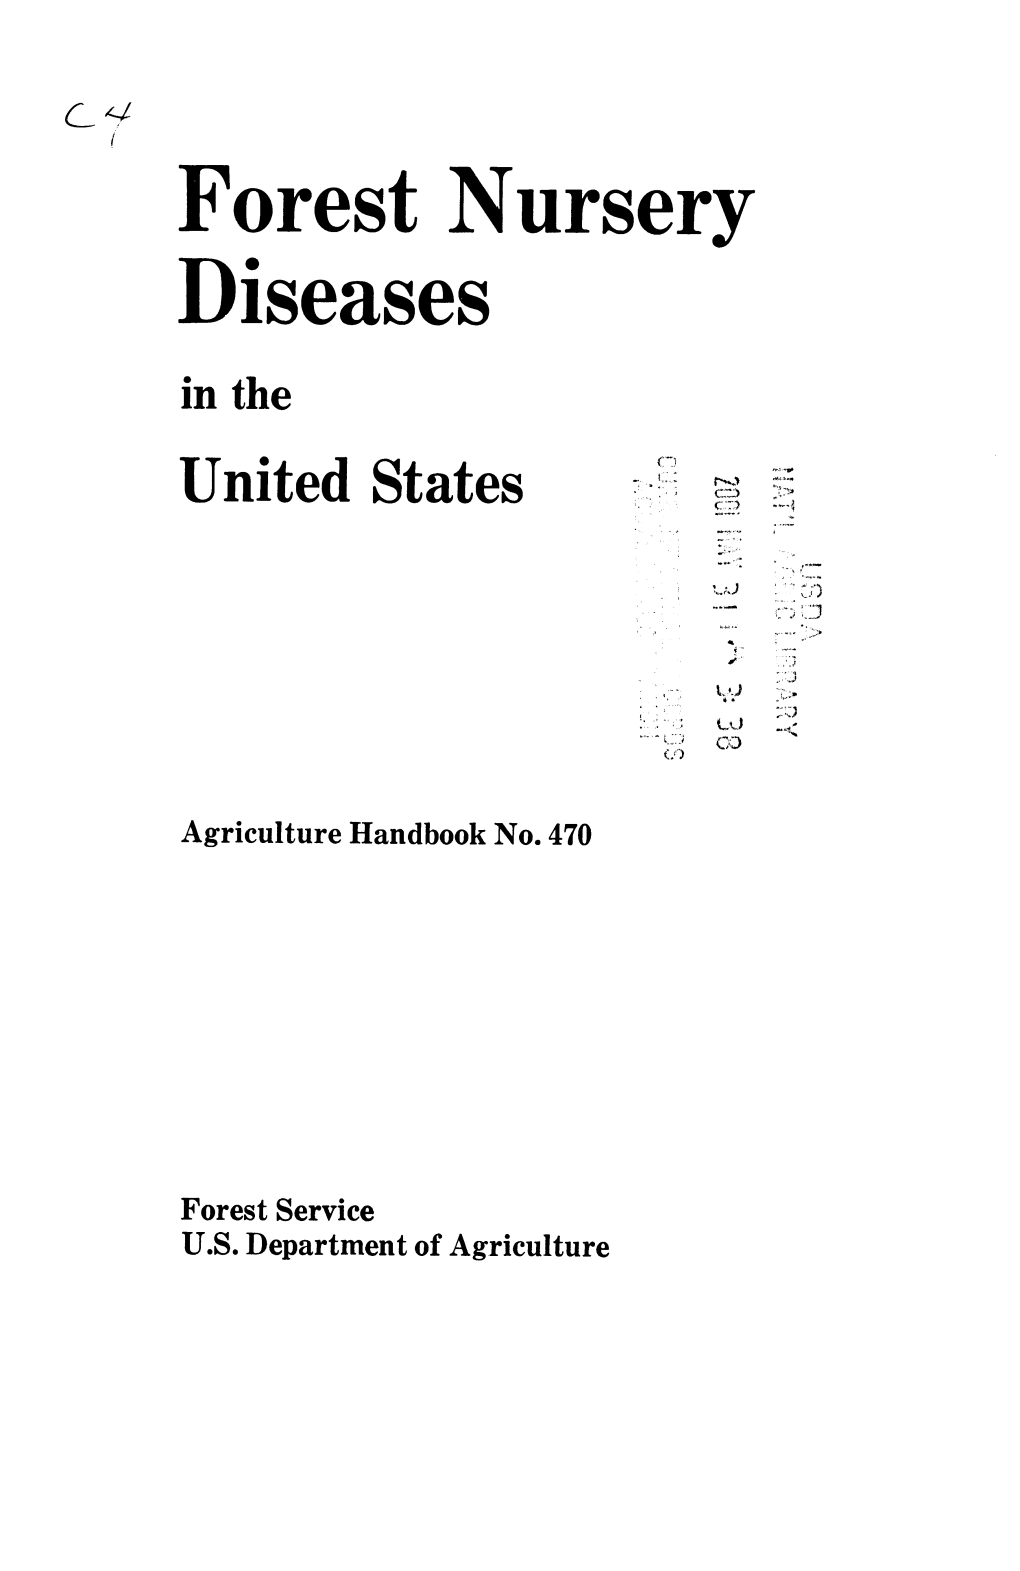 Forest Nursery Diseases in The